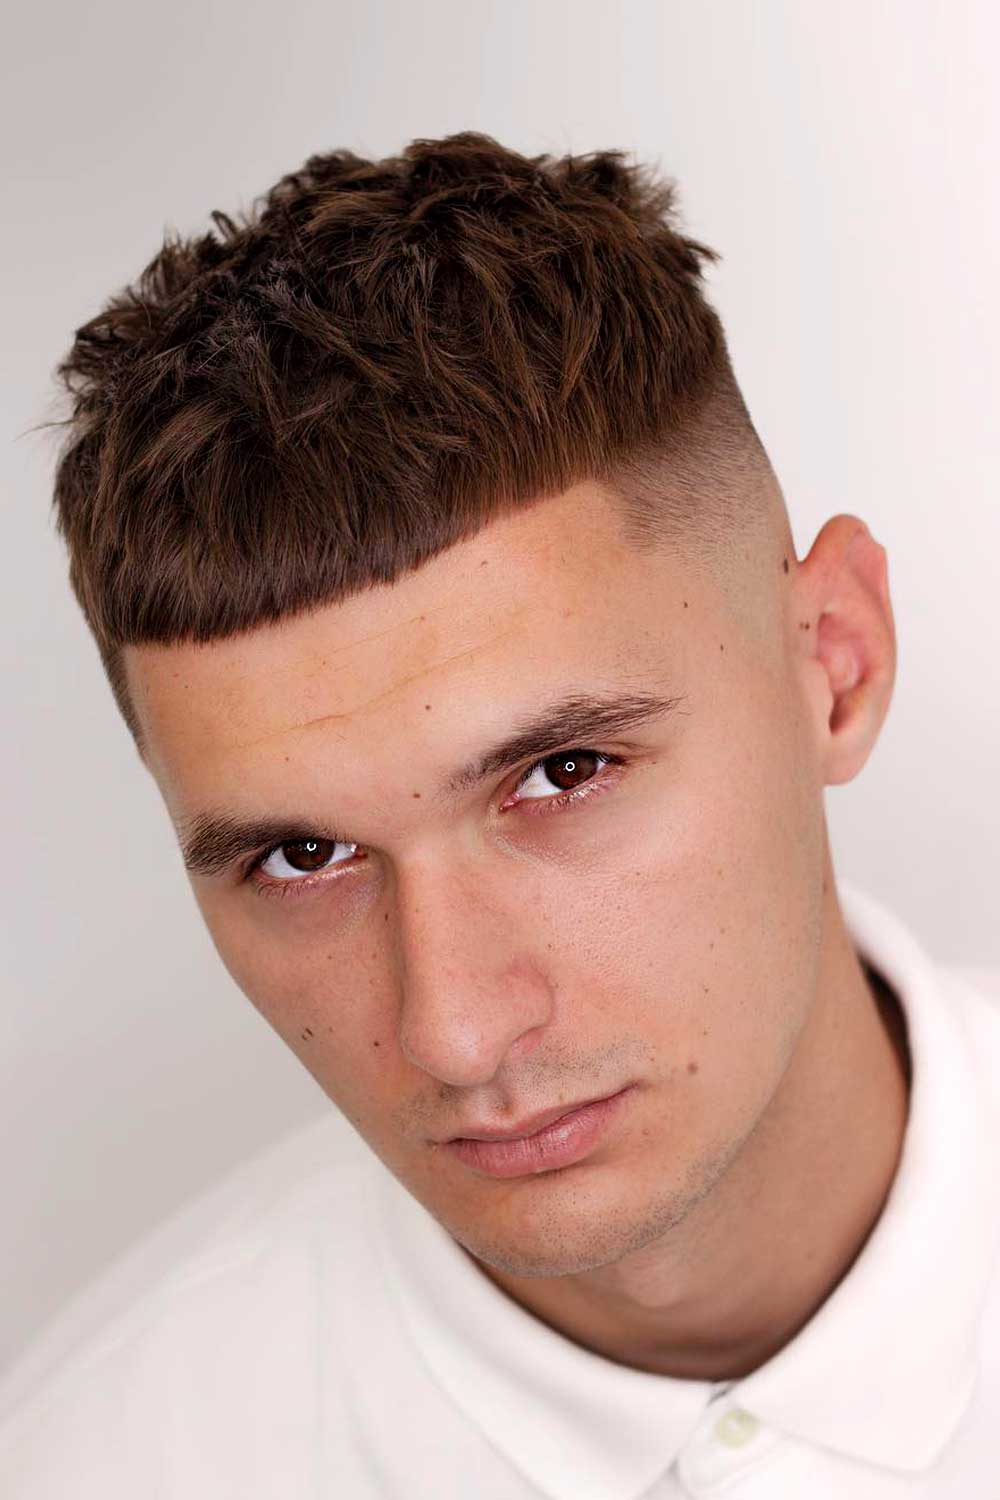 What Is The High And Tight Hairstyle? #highandtight #highandtighthaircut #fadehaircut